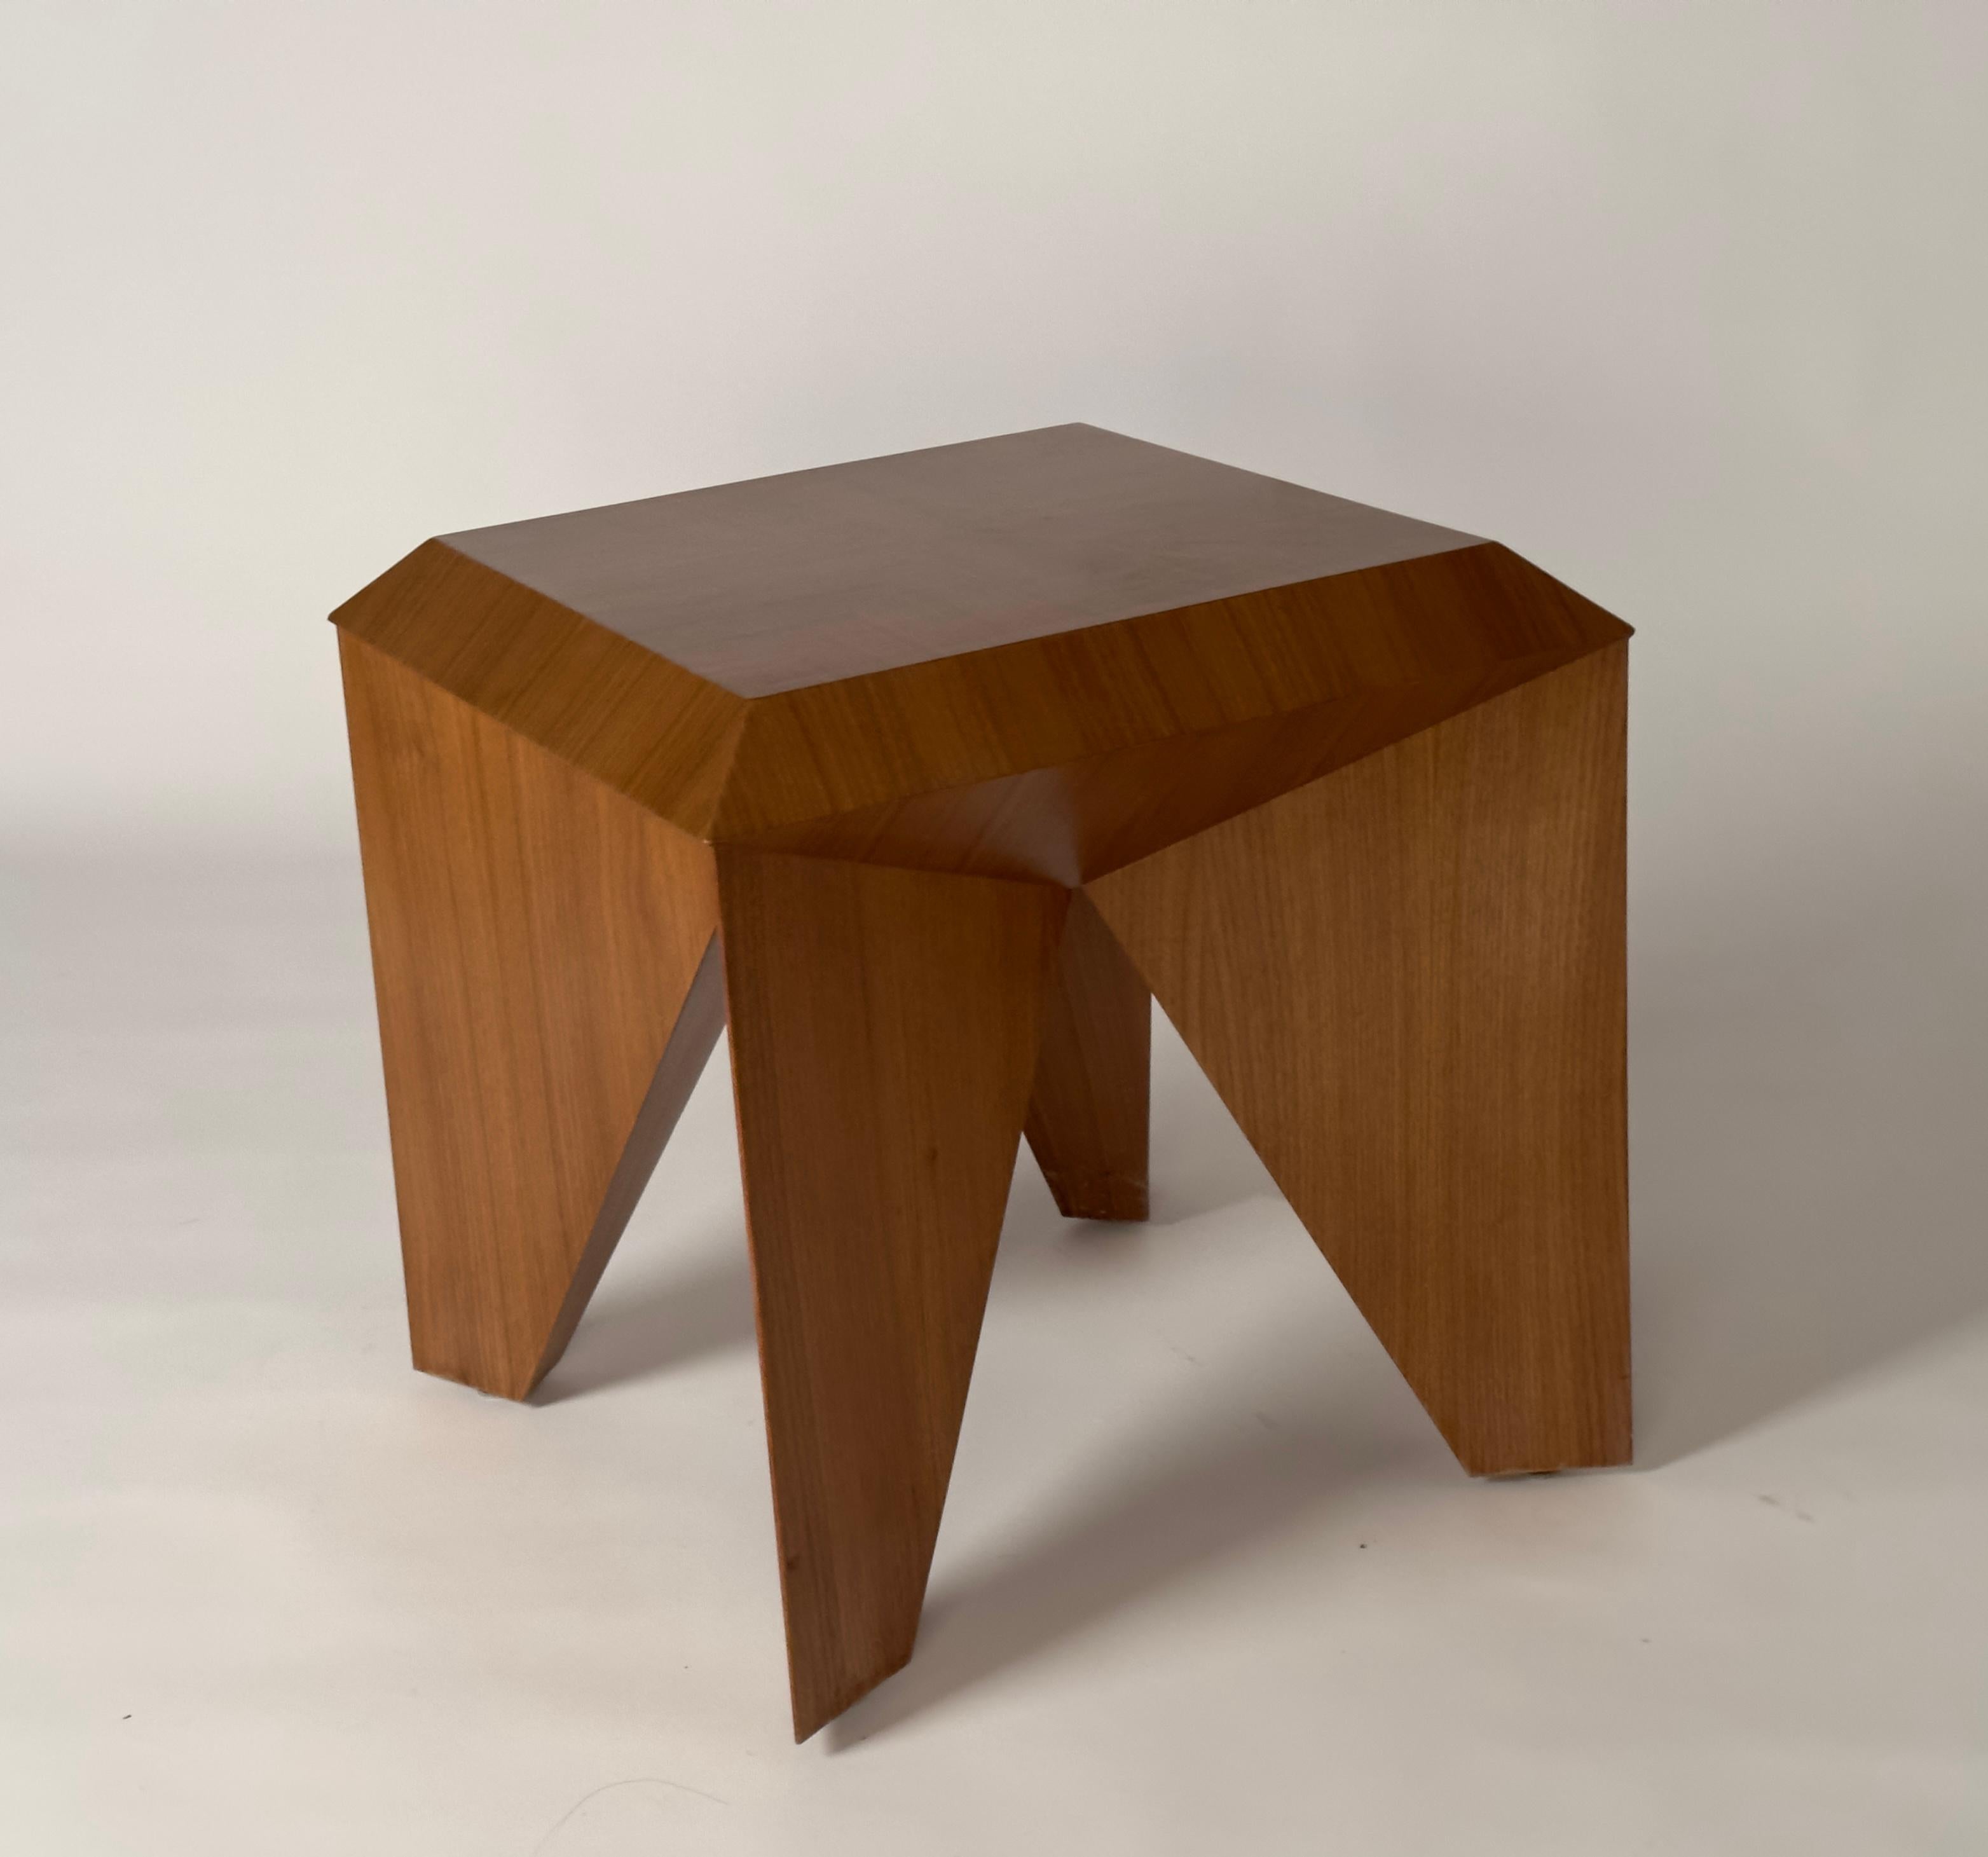 The ORIGAMI side table is an assembly of walnut veneer surfaces that fold and intersect creating an interplay of shadow and light. Designed by Hassan Abouseda for HAF. The ORIGAMI side table is customizable in different finishes and wood veneers.